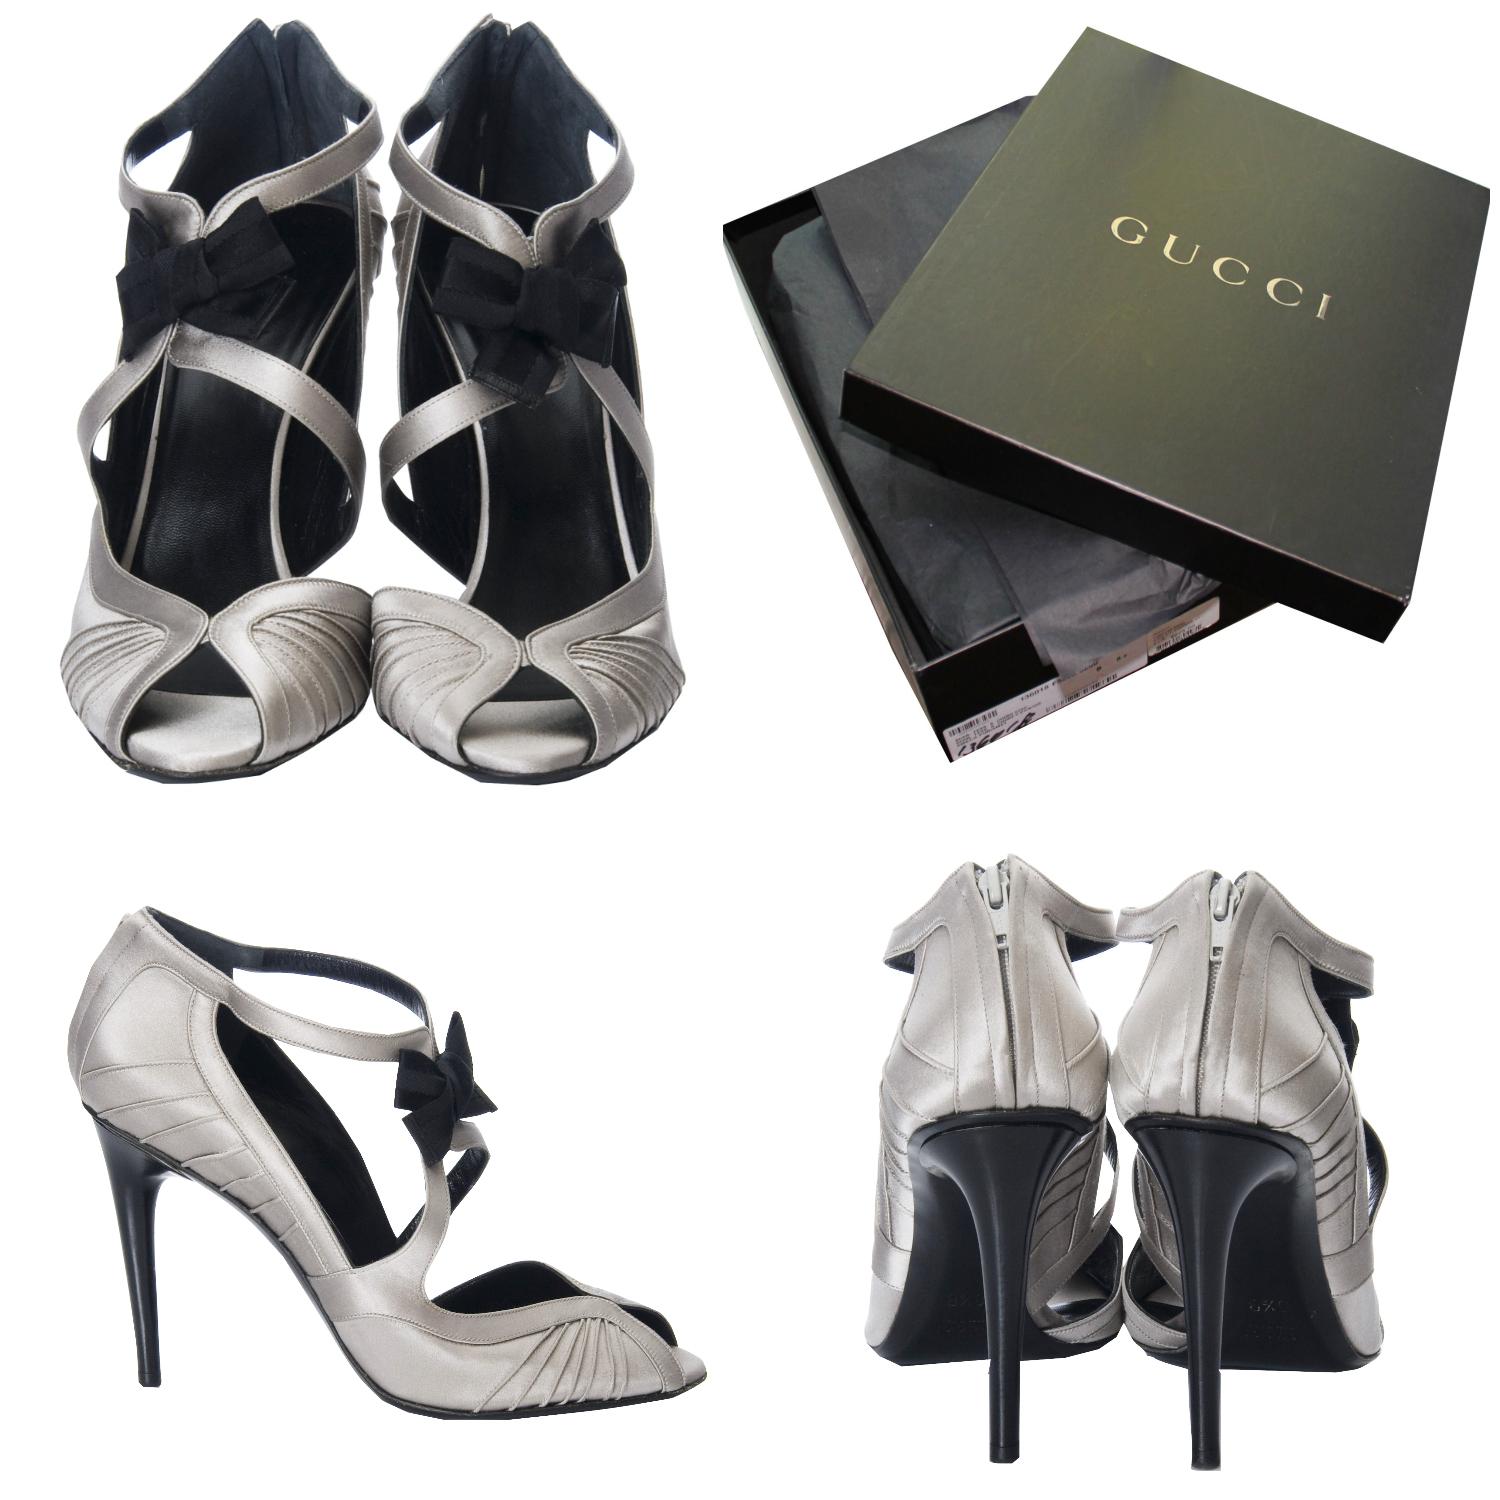 Tom Ford For Gucci Heels
Brand New
As Seen on Sarah Jessica Parker
* Stunning in Silver Satin
* Tom Ford for Gucci
* Size: 9
* Black Satin Bow at Front
* Leather Insole 
* Zips up the Back 
* 4